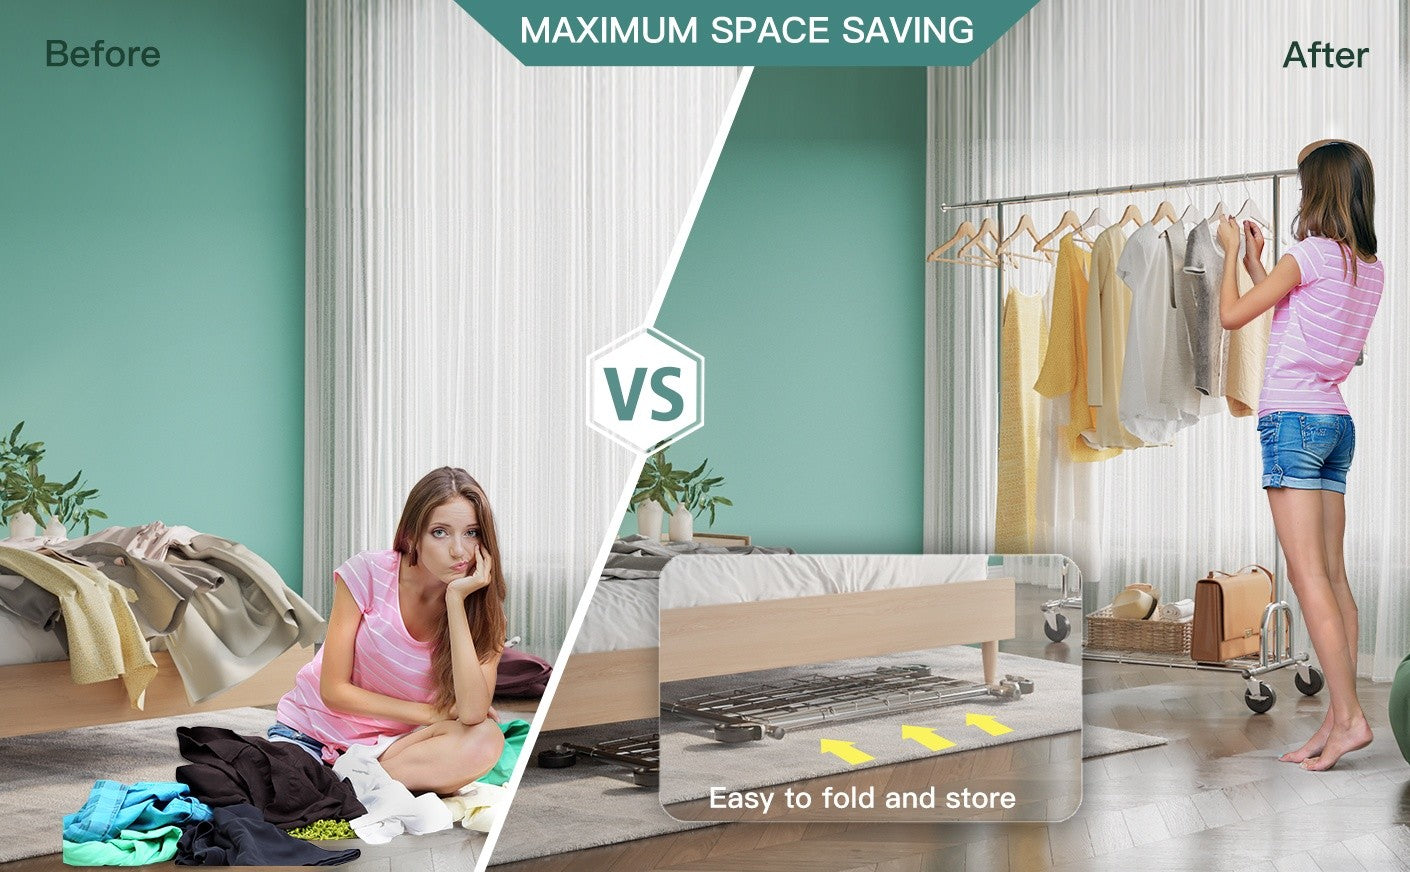 clothes hanger stand maximizes your storage space and keep your room clutter-free